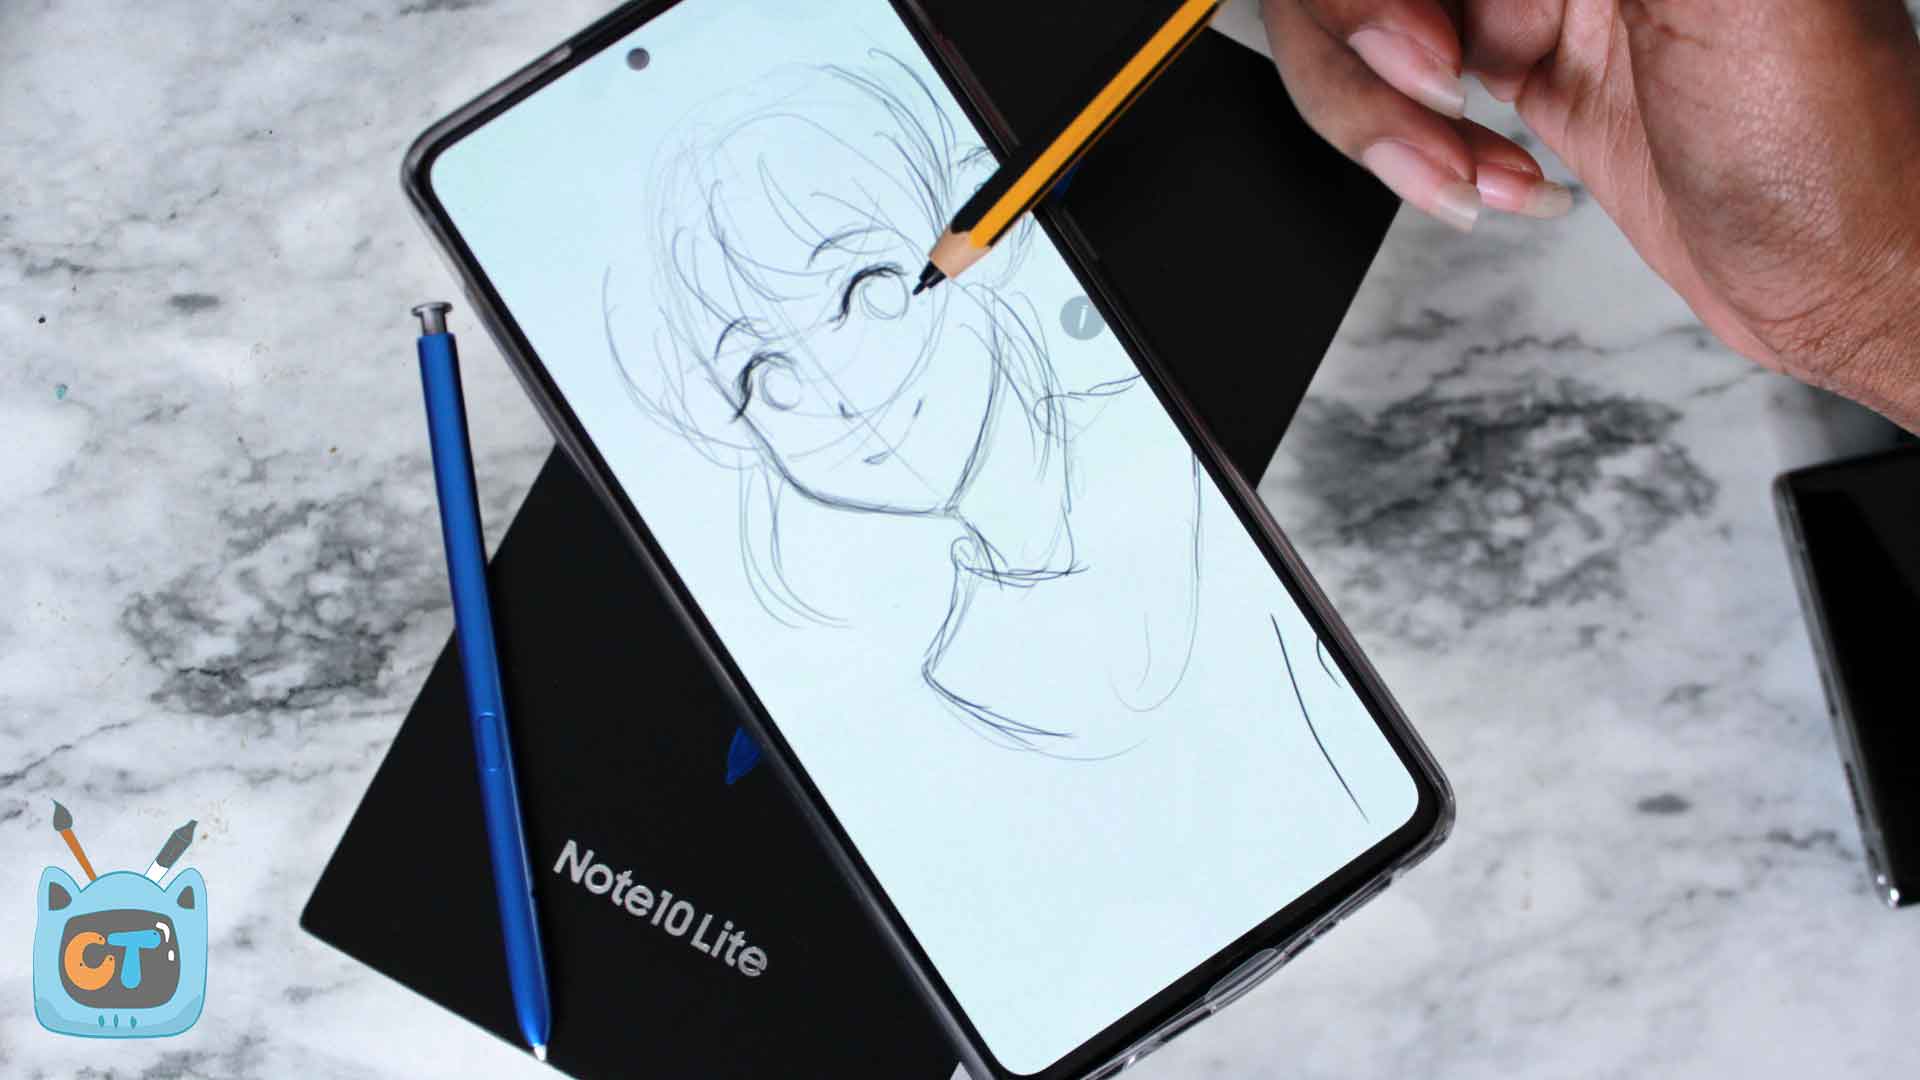 Samsung Galaxy Note 10 Lite review: Making the S Pen experience